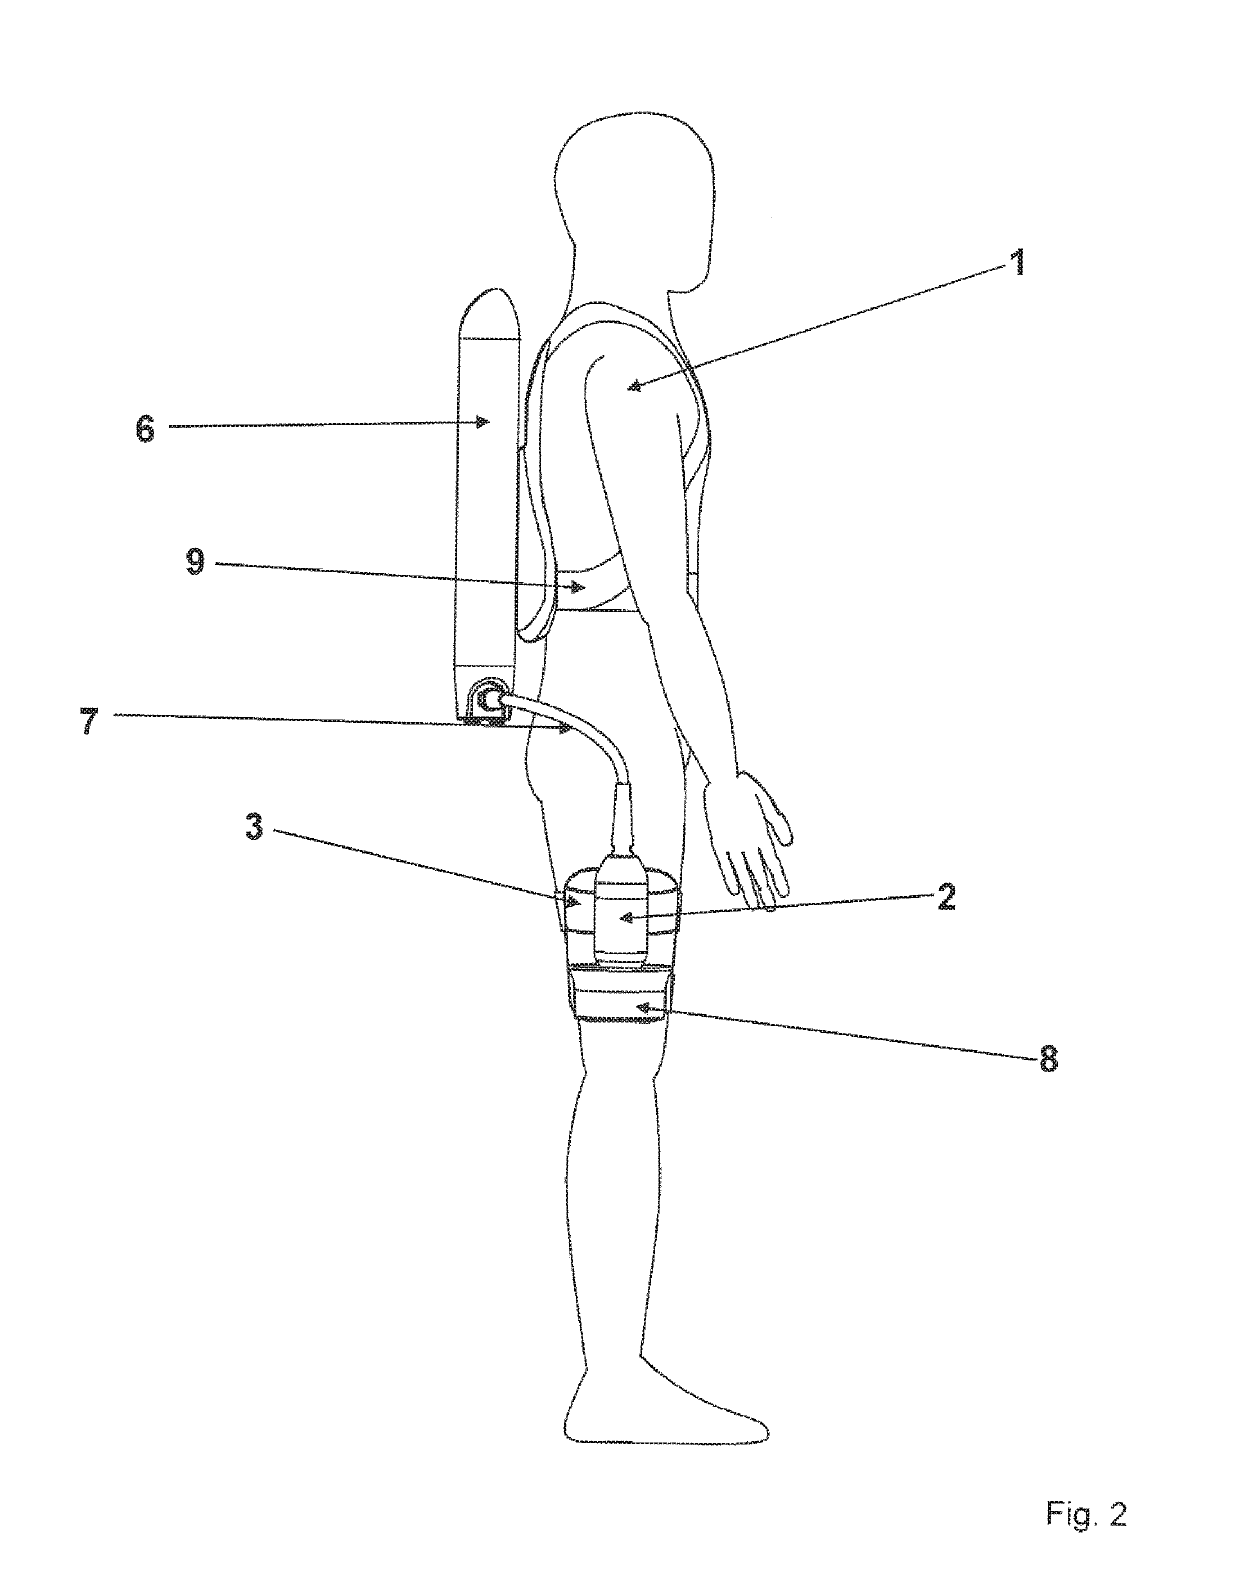 Propulsion device for divers and swimmers